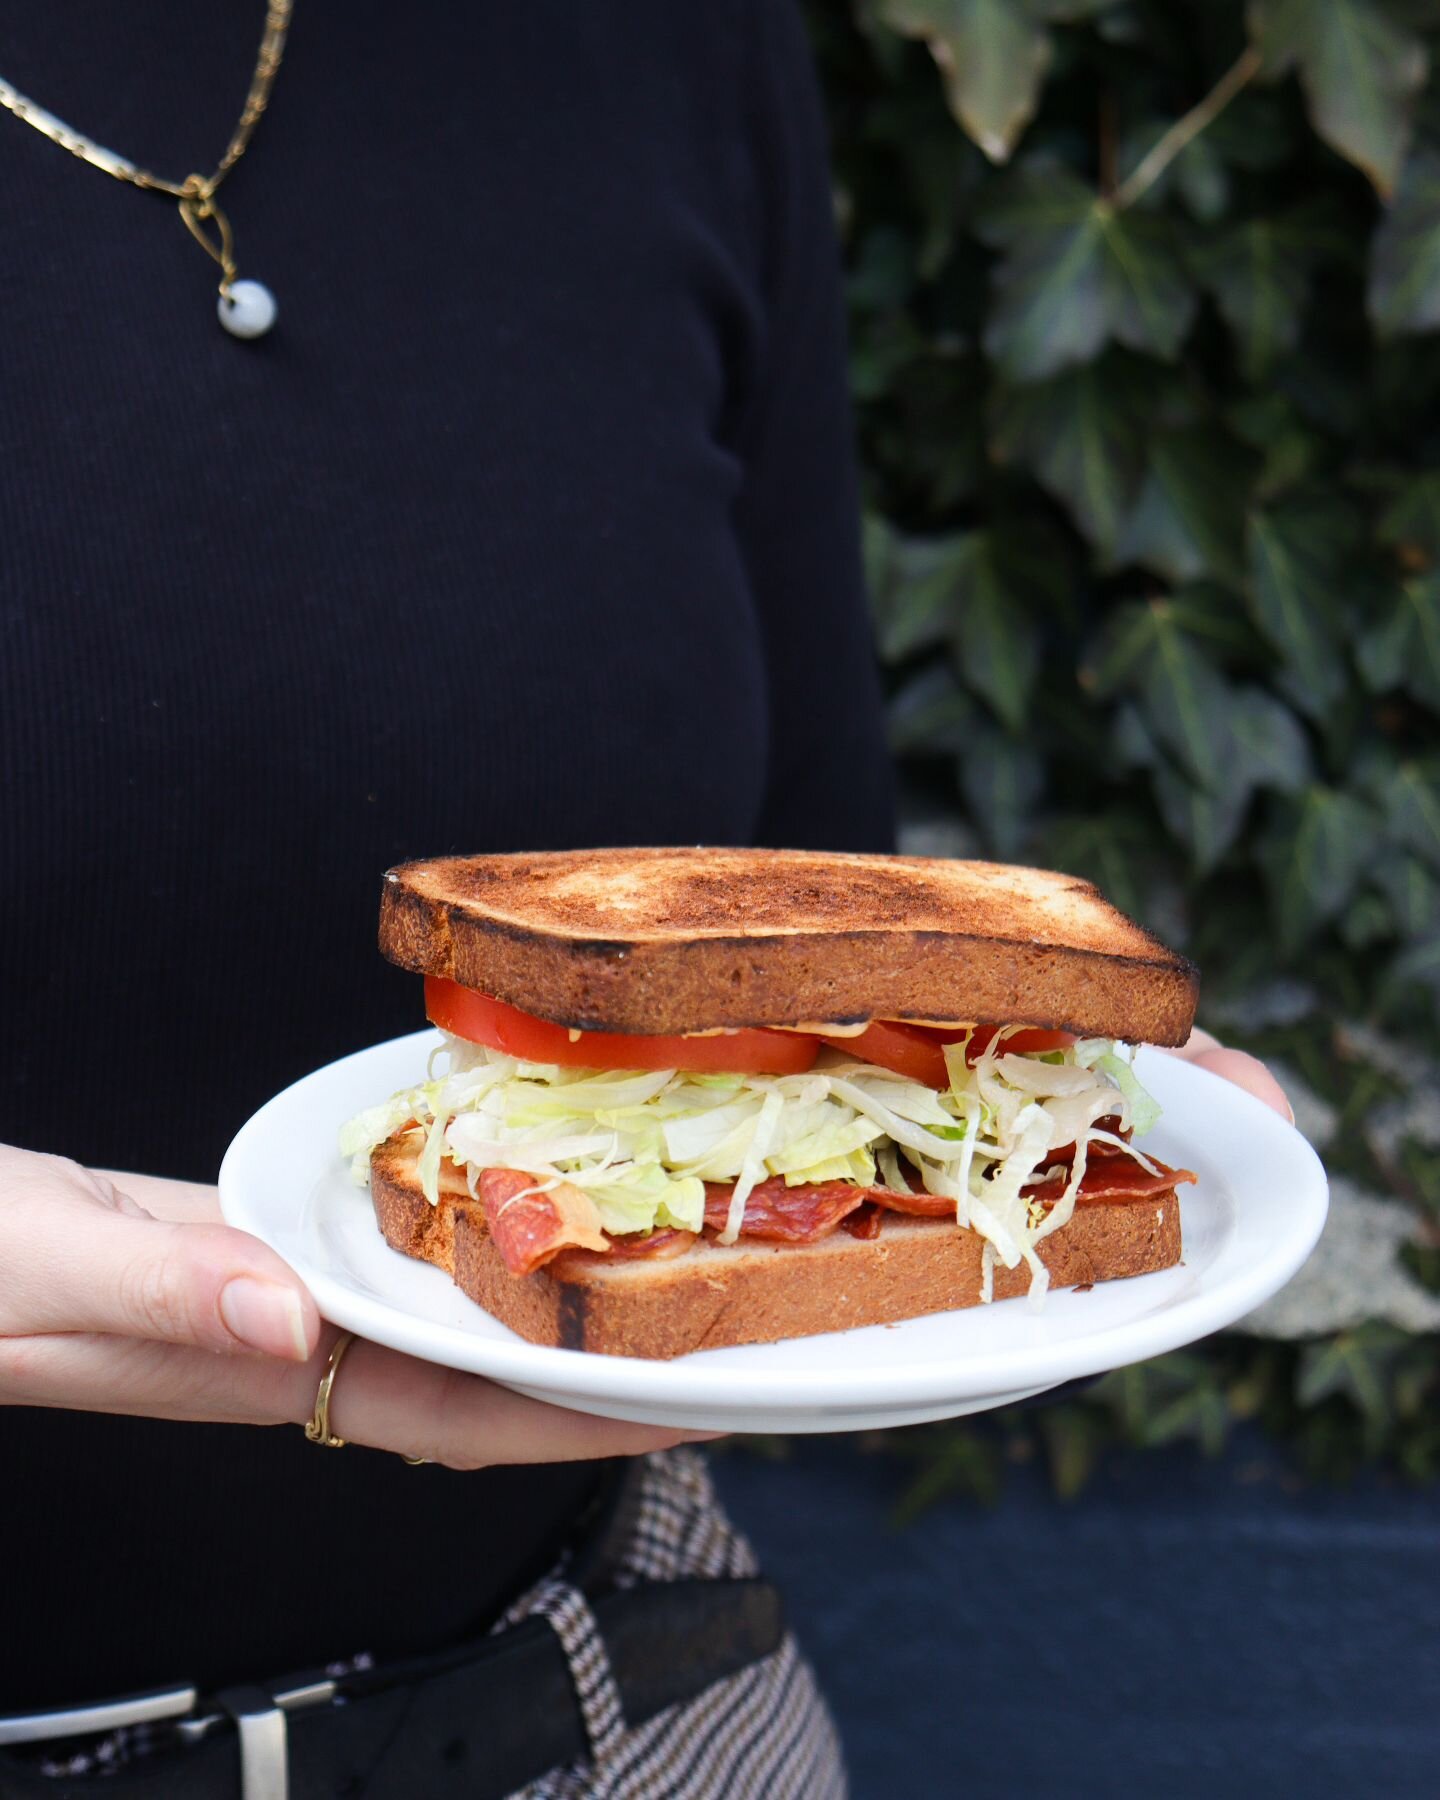 The PLT is back, it's beautiful, and dare we say even more delicious than the last time 'round. 🥓🥬🍅 Crispy prosciutto, vine tomatoes, shredded lettuce, and spicy garlic mayo on housemade white bread. Available while quantities last!